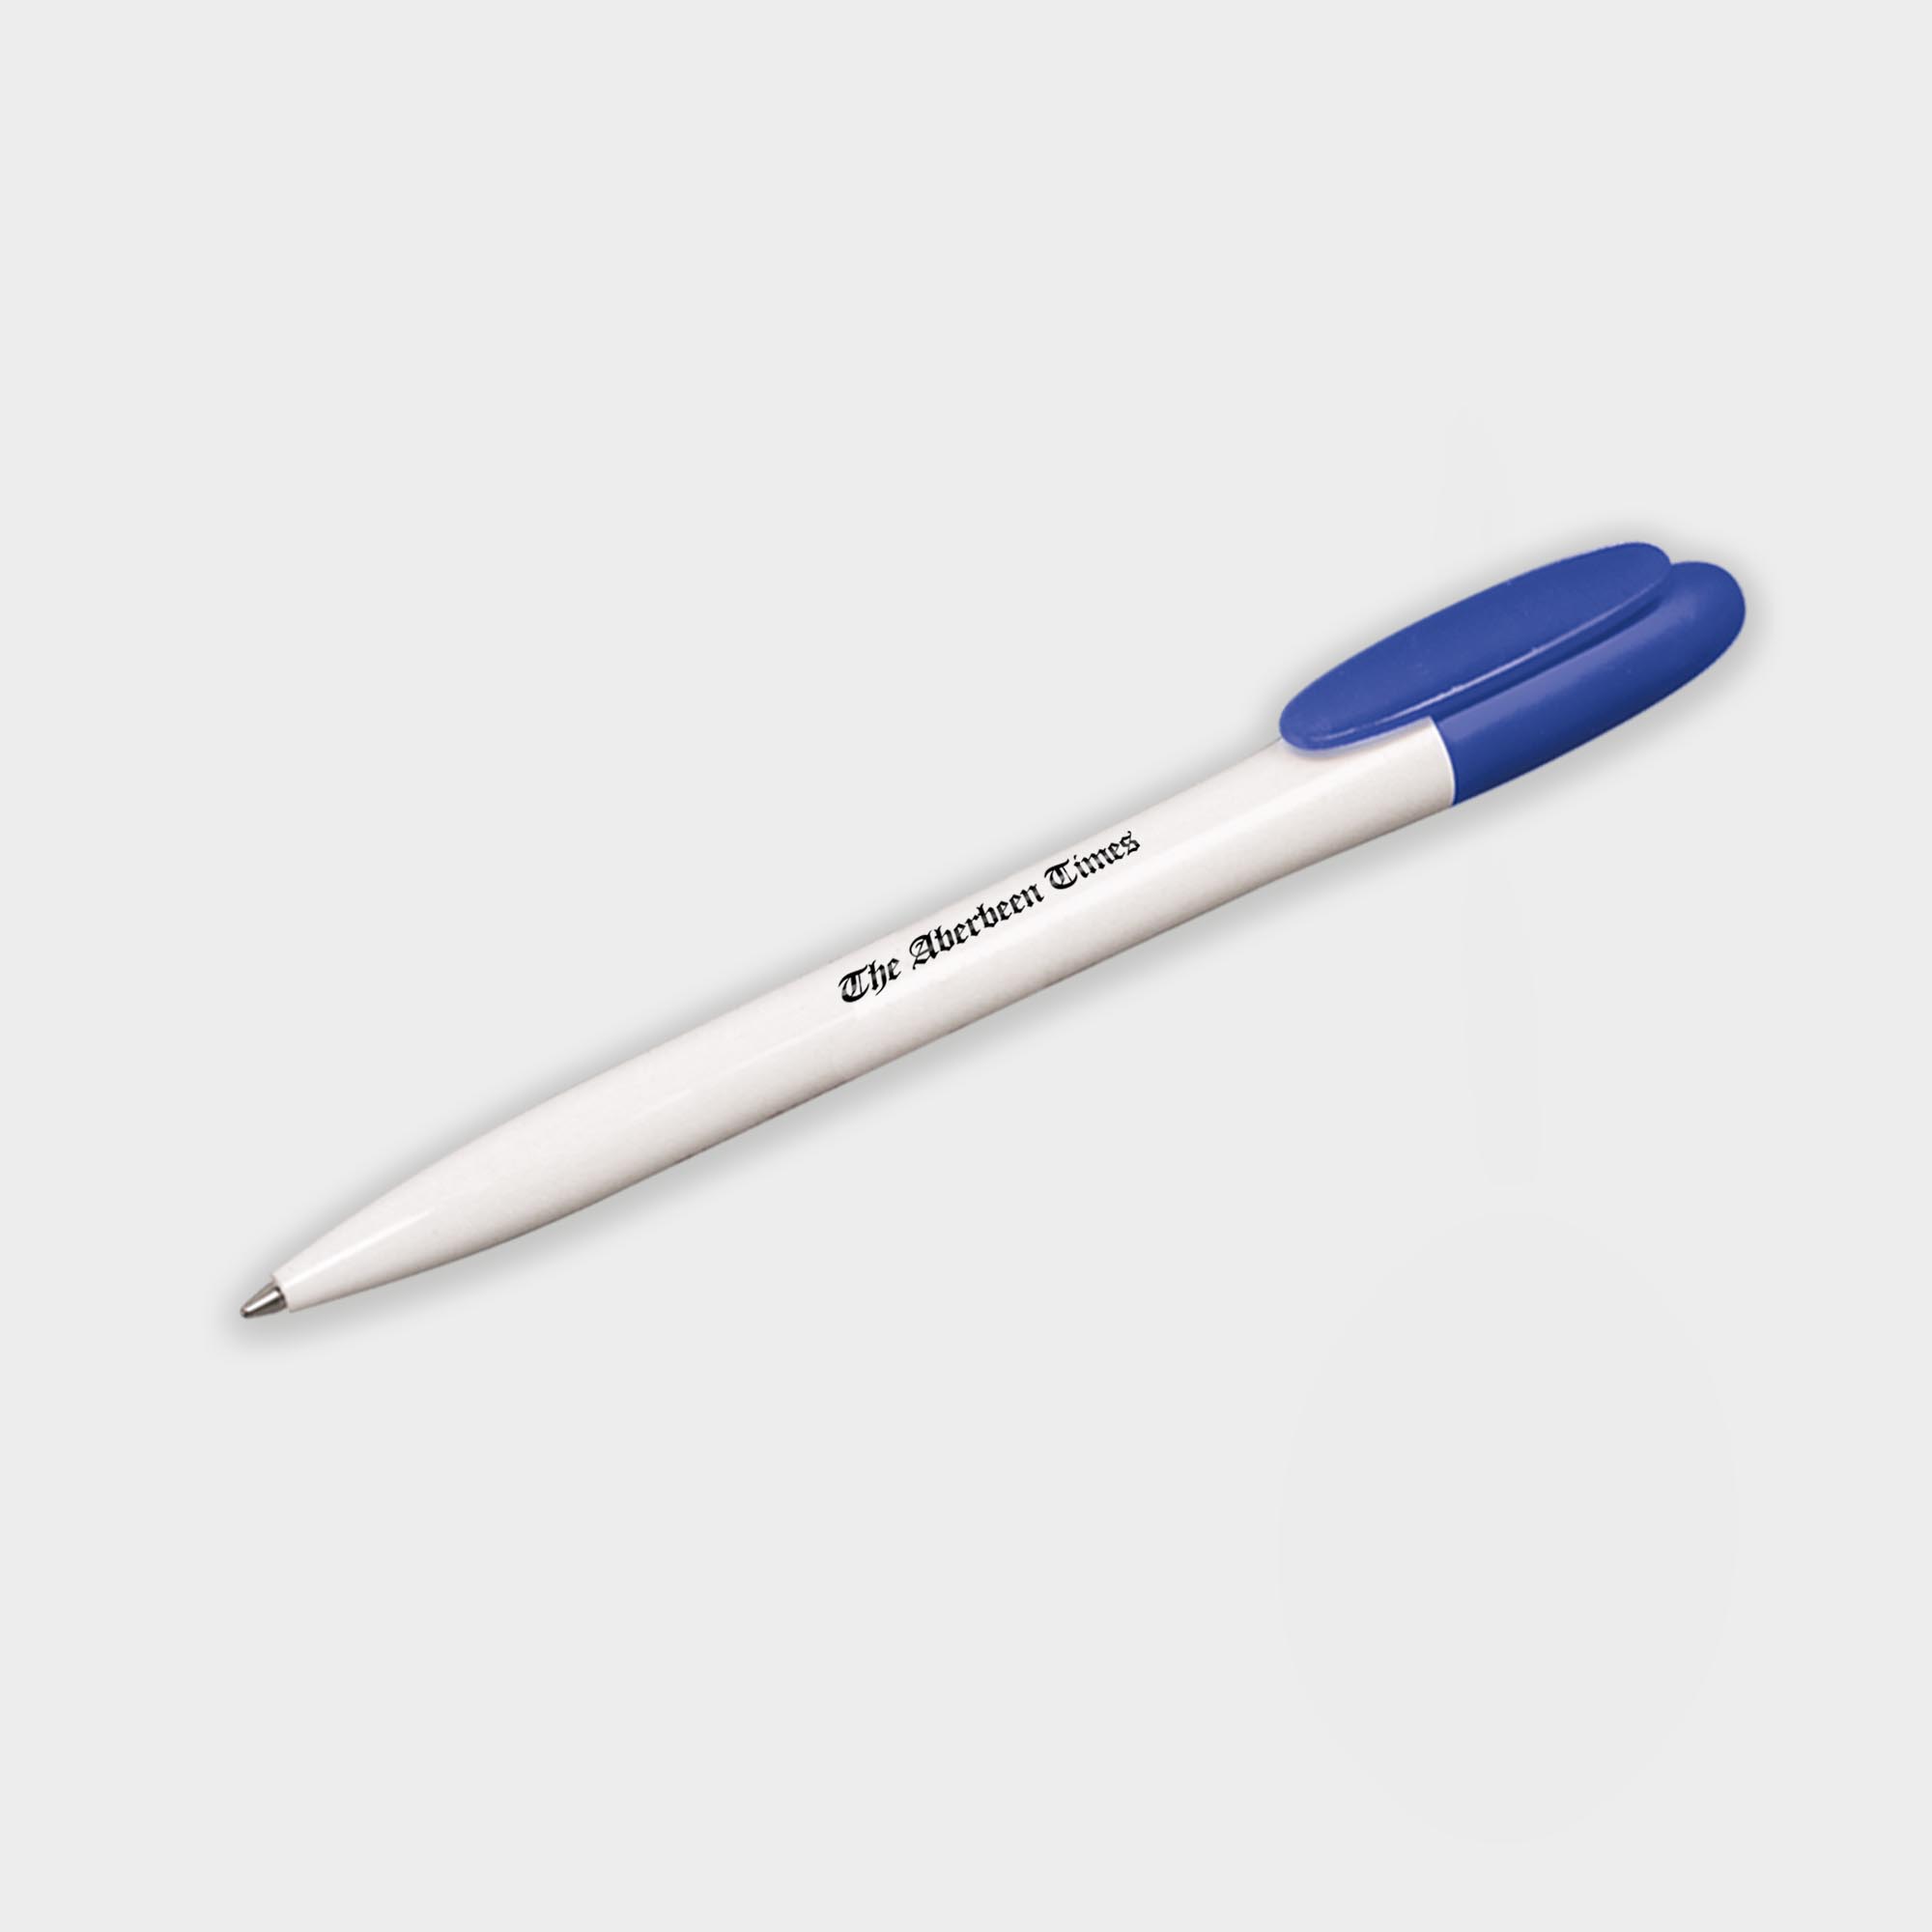 The Green & Good Realta ballpen. It is made in the EU from recycled plastic. Available in a variety of colours with a twist action mechanism. Comes with black ink as standard. One of our bestsellers. White / Blue